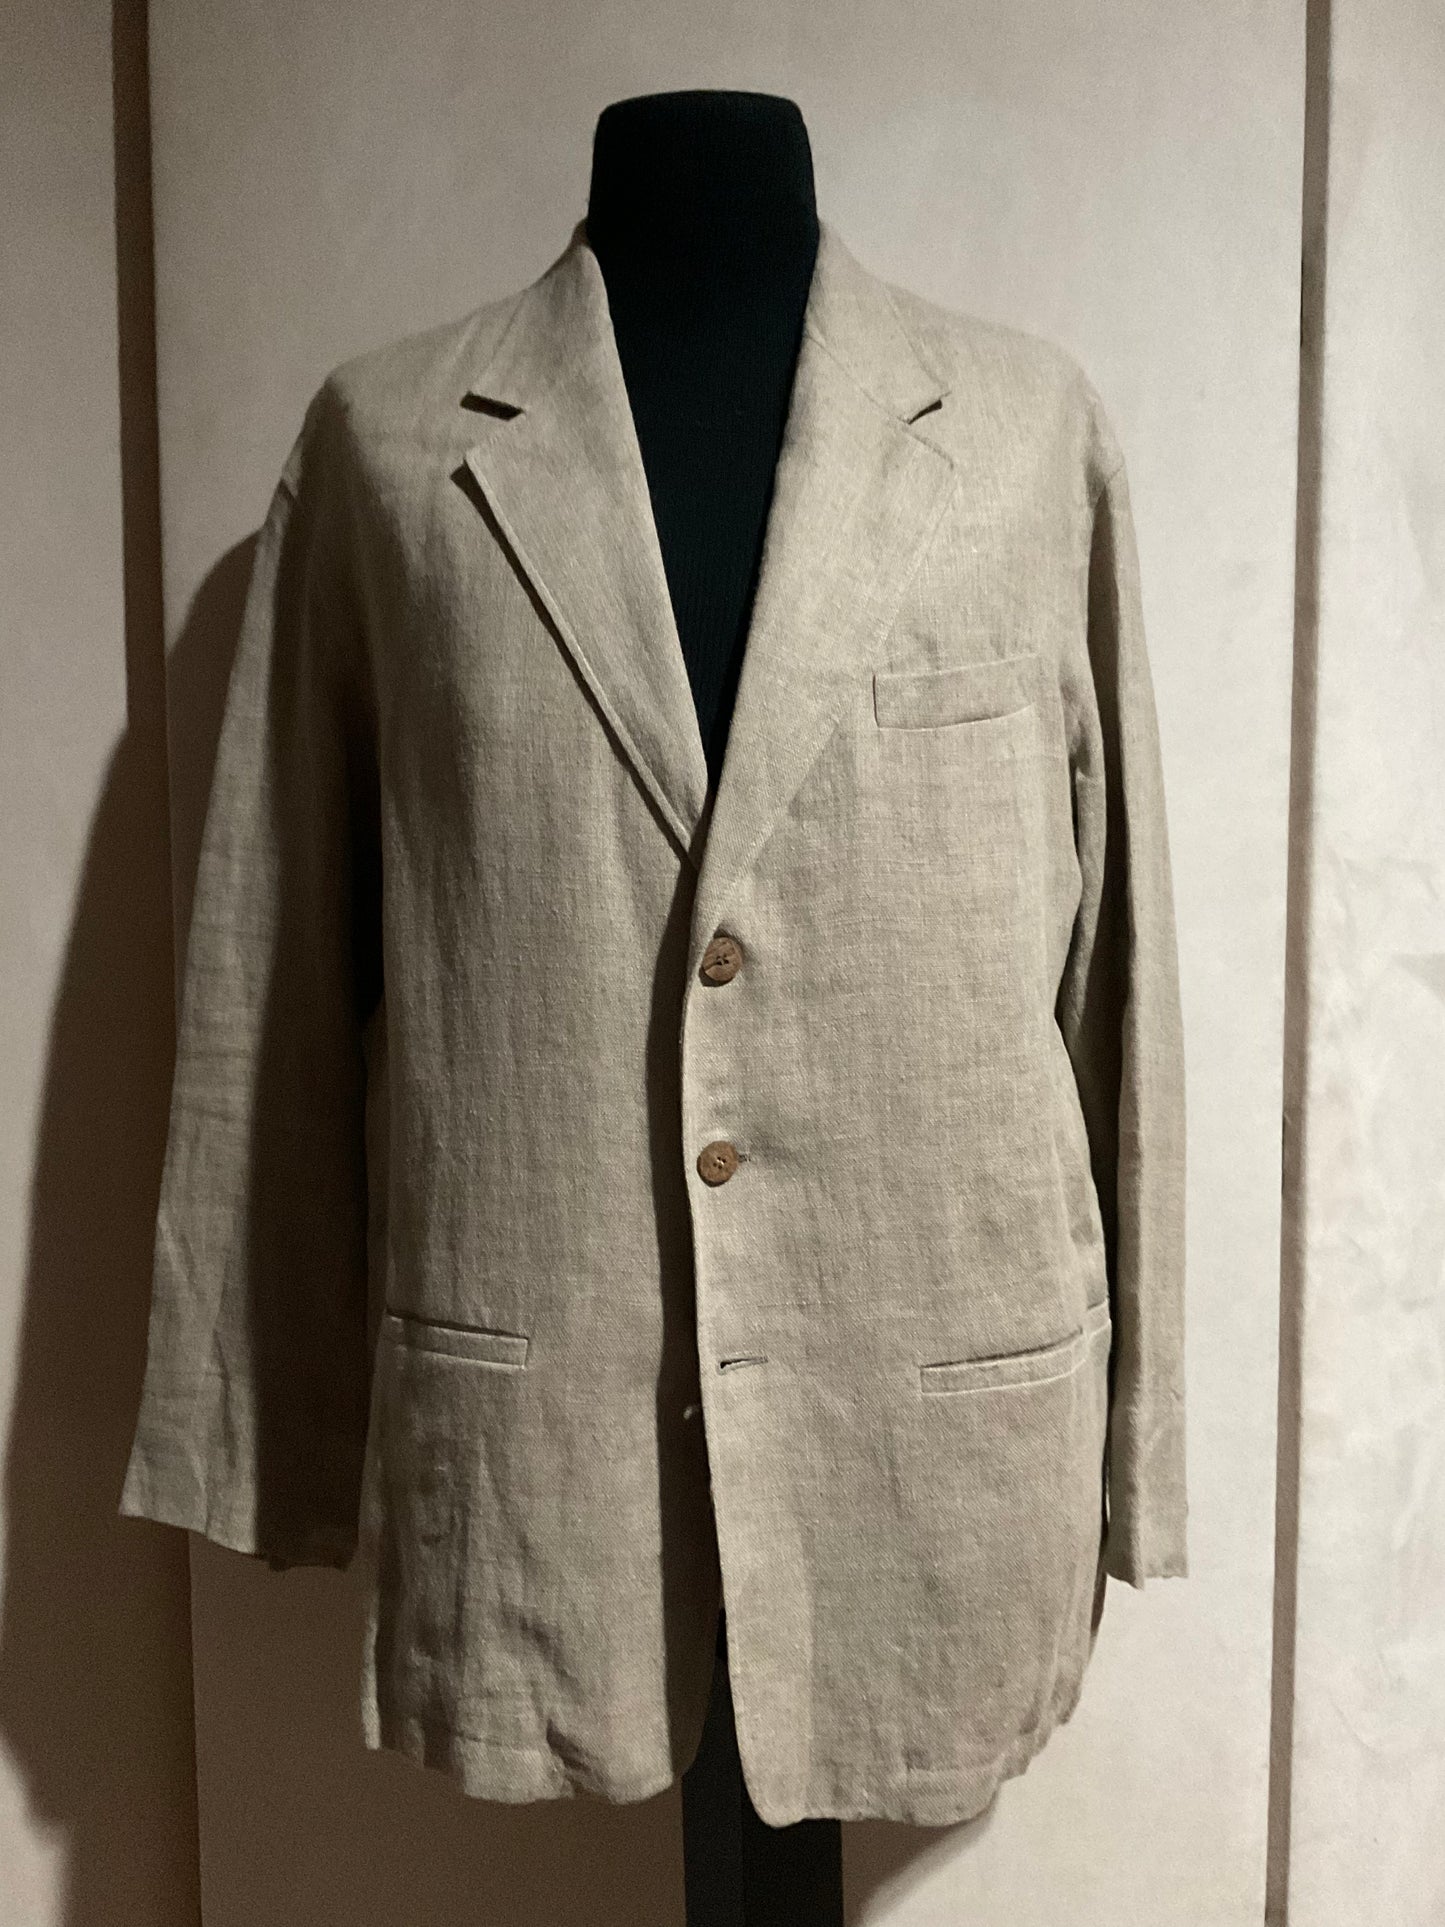 R P SPORTS JACKET / NATURAL LINEN / UNCONSTRUCTED / MEDIUM - LARGE / NEW / MADE IN ITALY